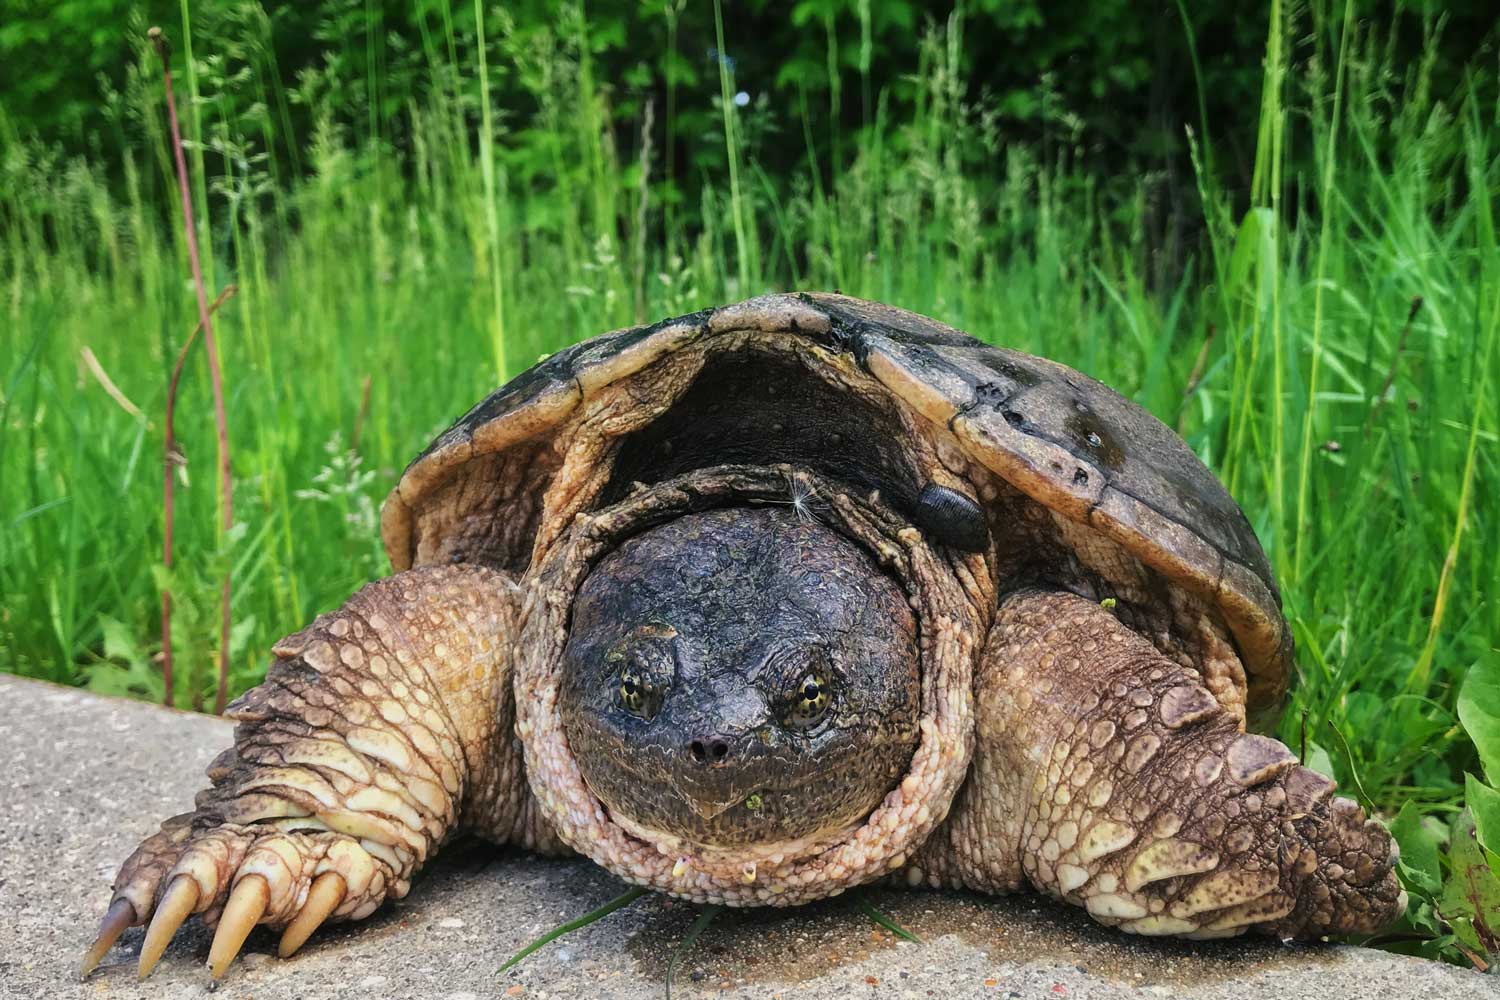 A snapping turtle walking from the grass onto a sidewalk.